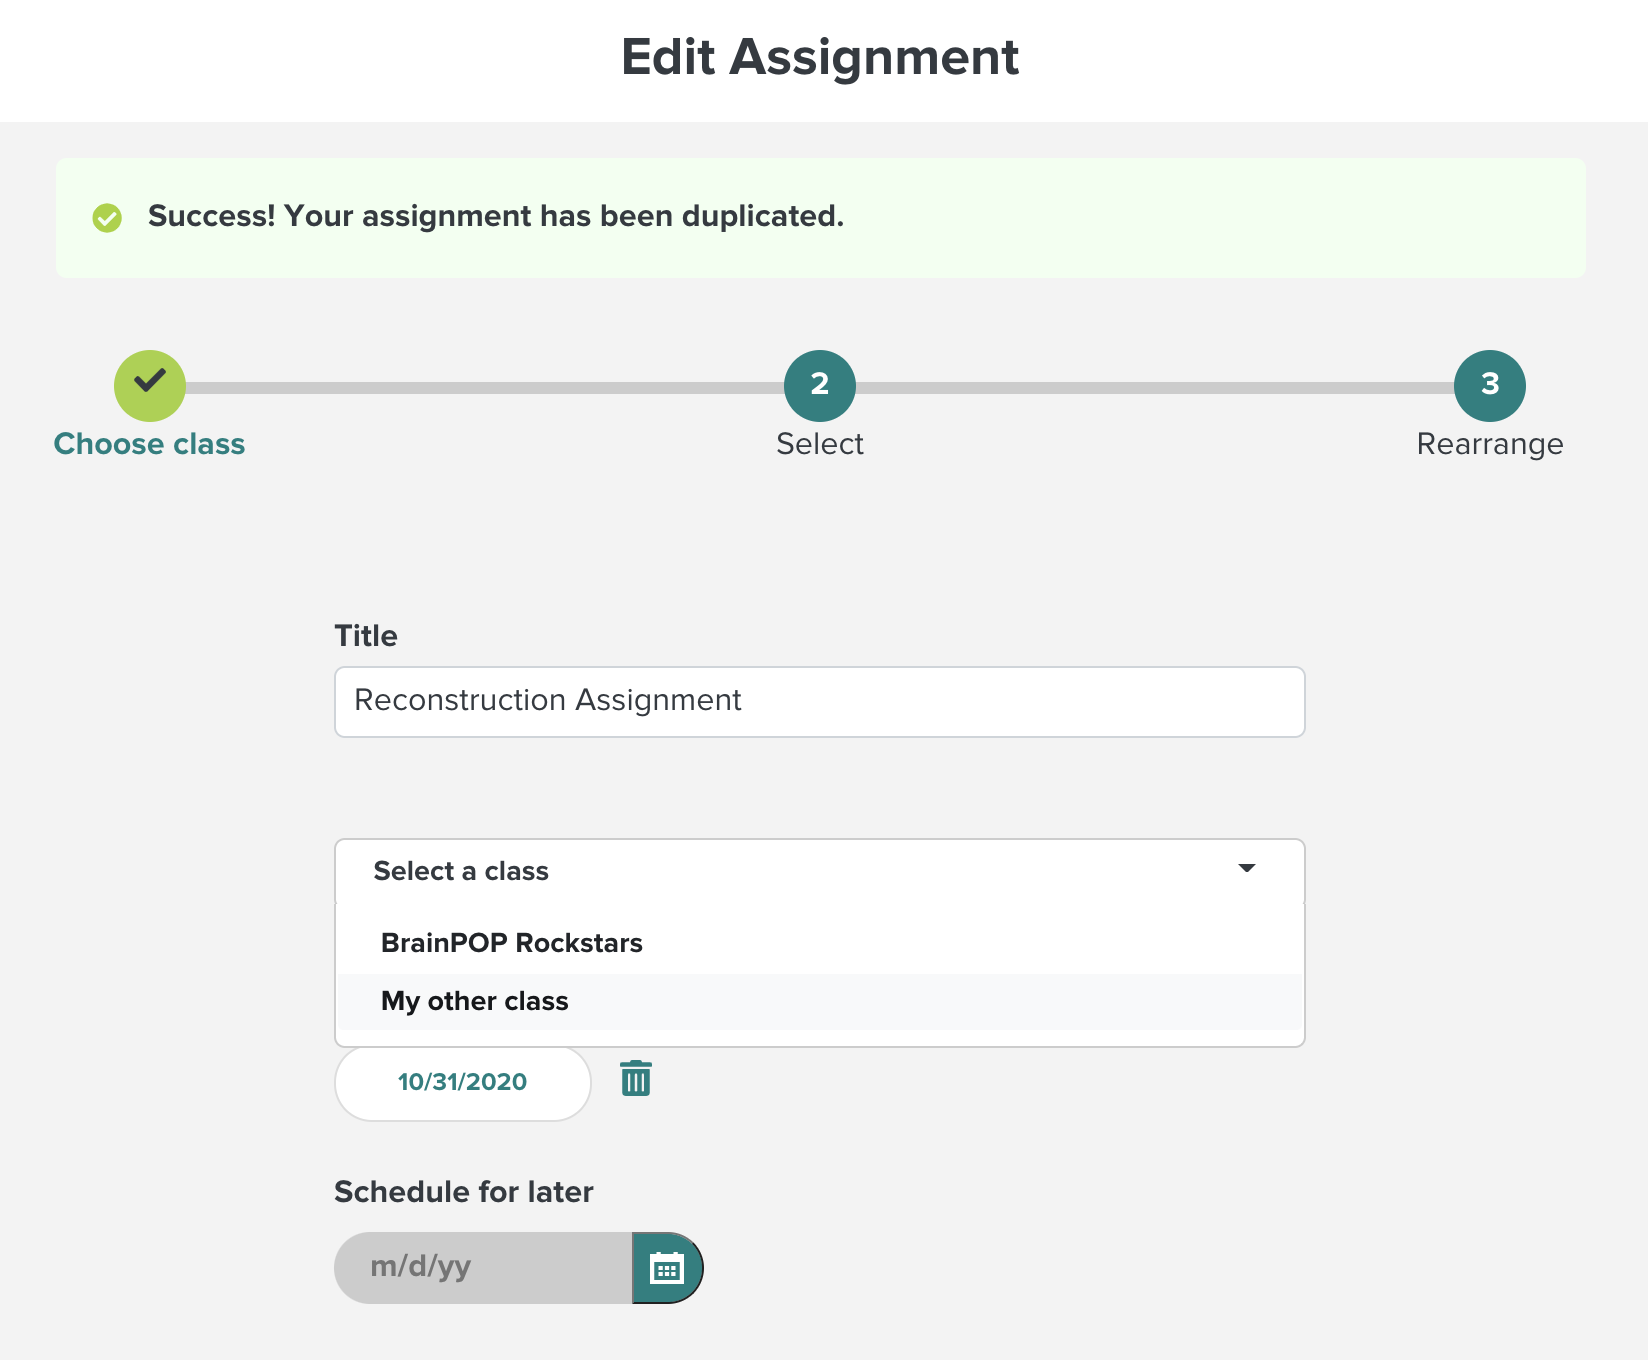 image of the duplicate assignment in the assignment builder with success confirmation